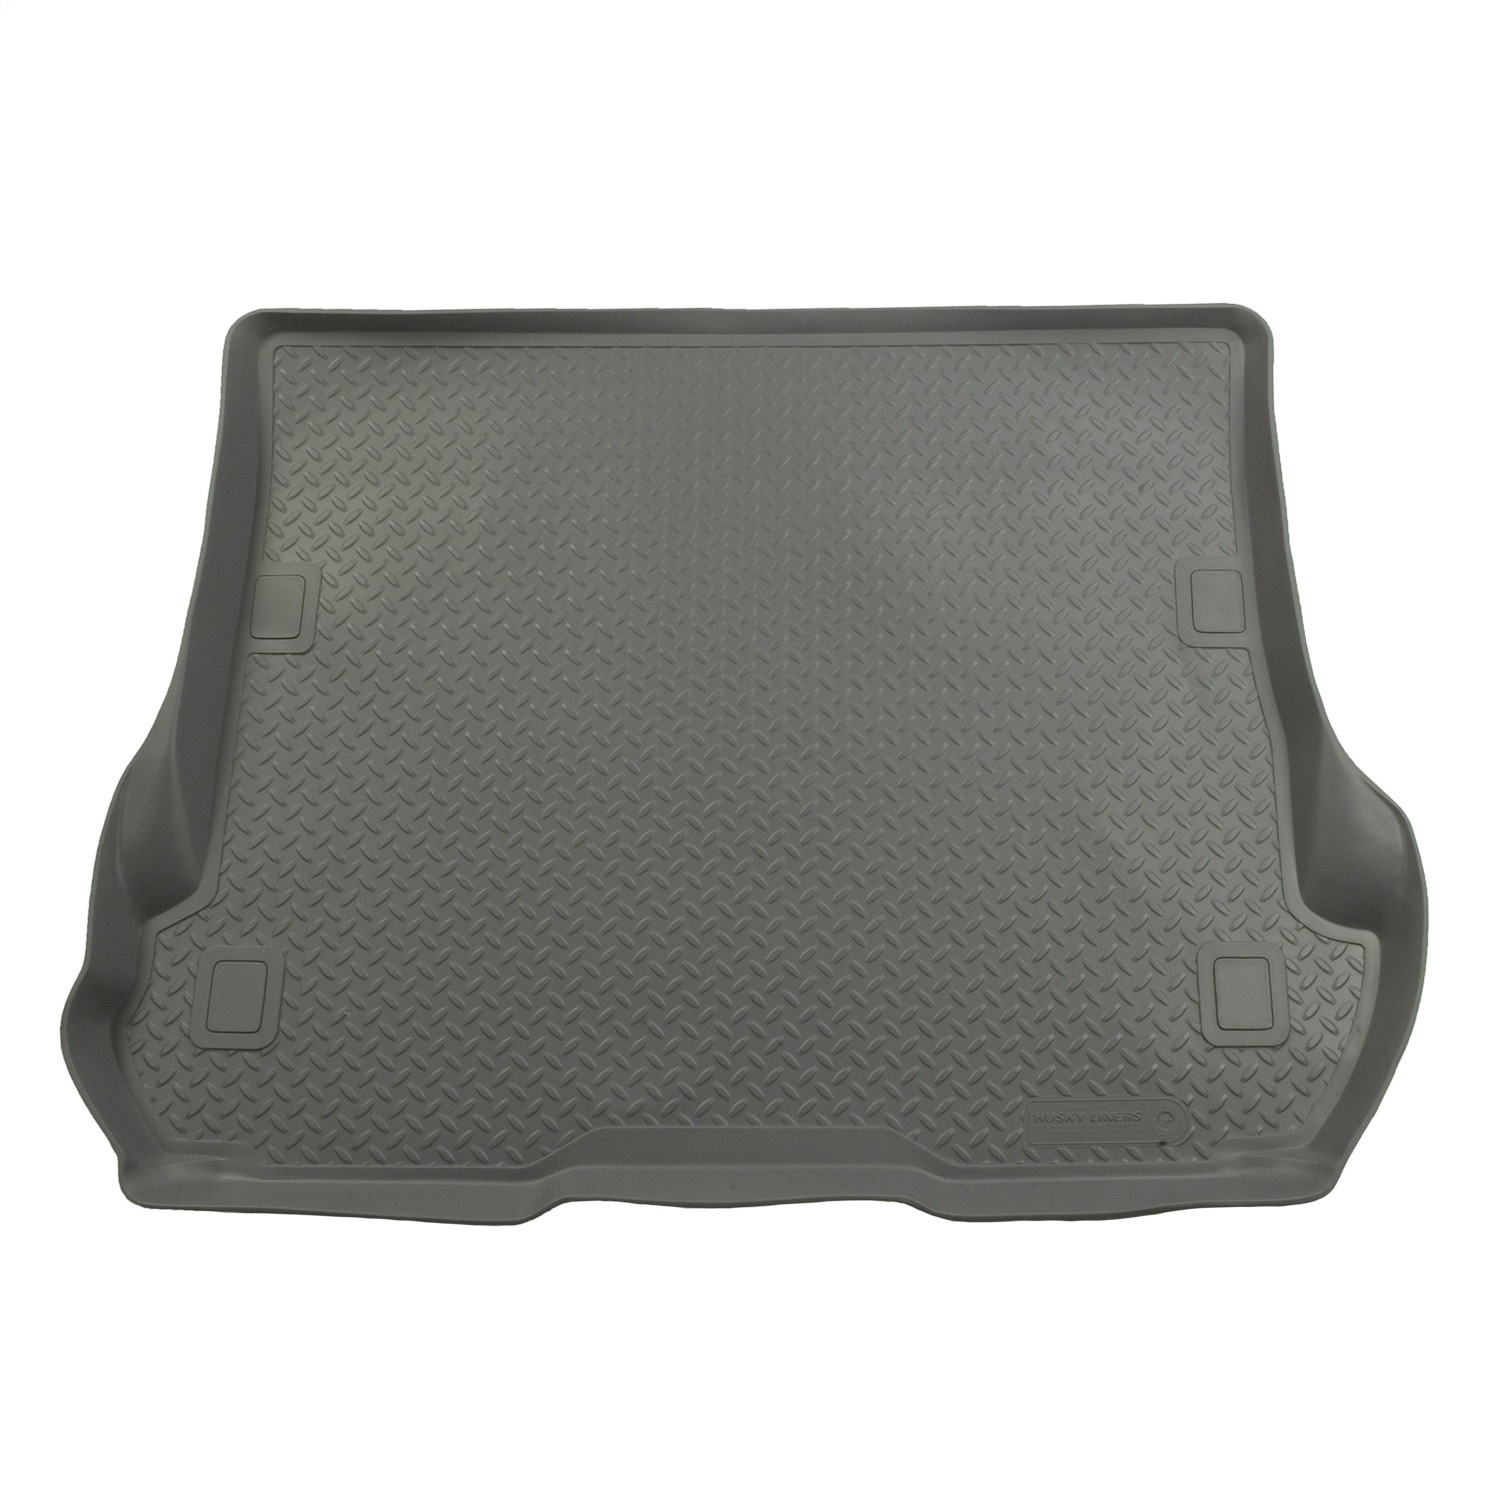 Husky Liners Husky Liners 25552 Classic Style; Cargo Liner Fits 01-06 Sequoia